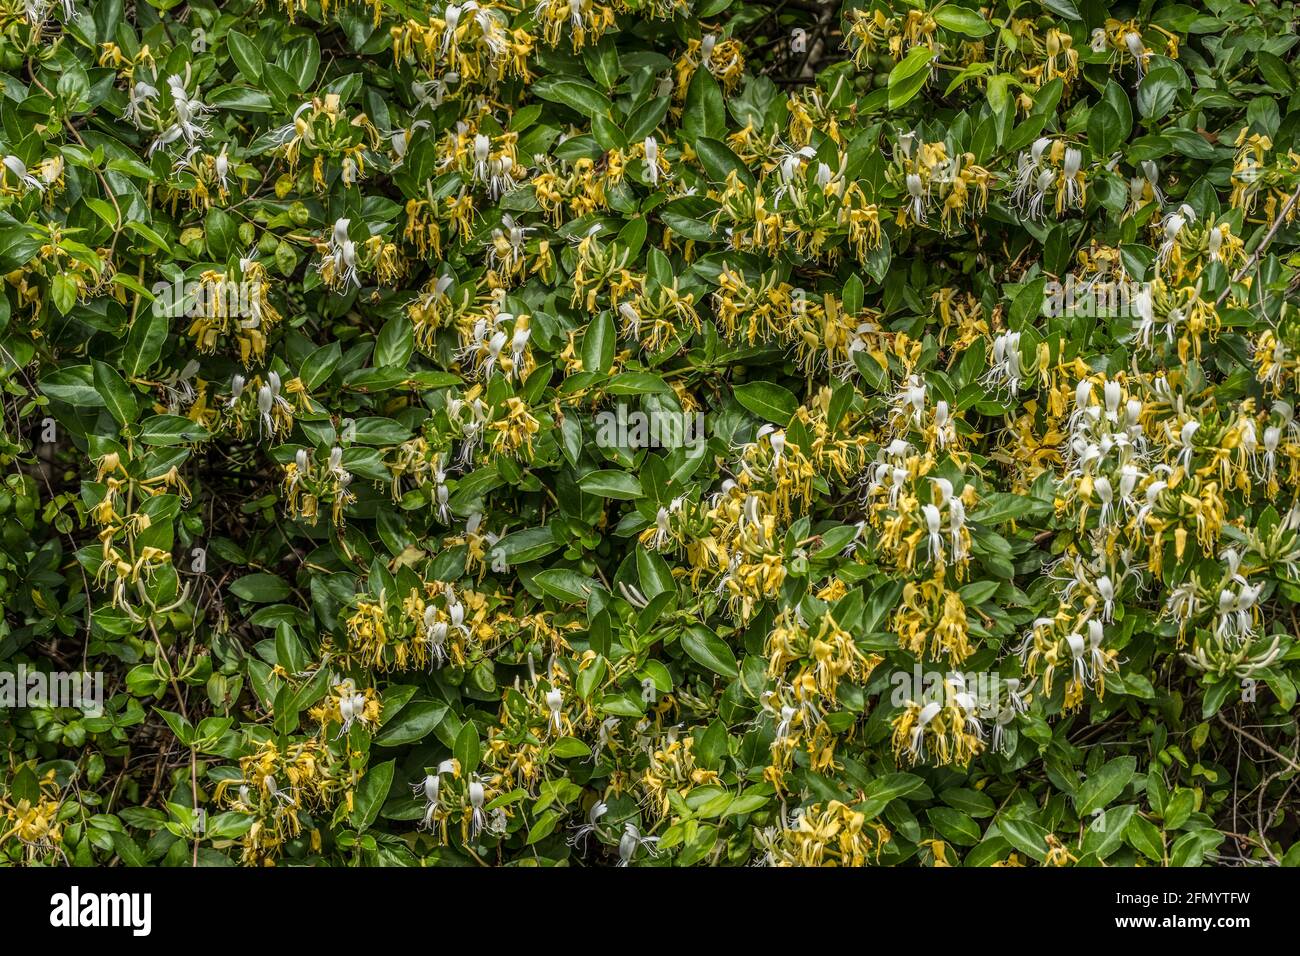 A wild honeysuckle bush in full bloom with vines of yellow and white flowers growing in a forest on a sunny day in springtime Stock Photo